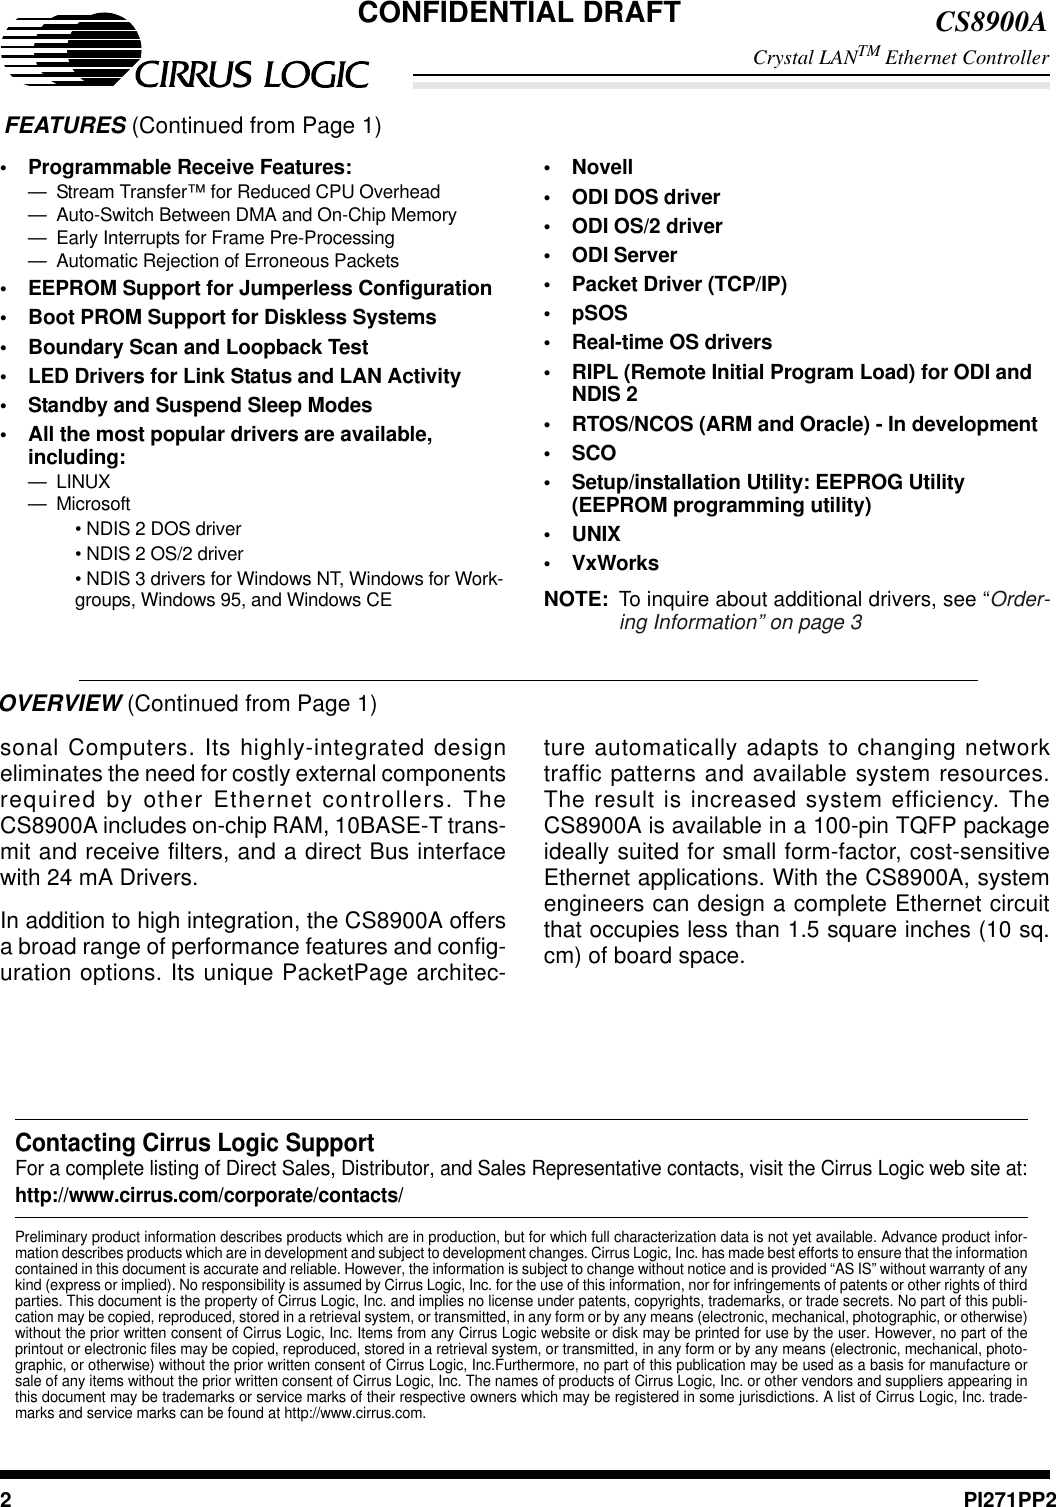 CS8900ACrystal LANTM Ethernet Controller2PI271PP2OVERVIEW (Continued from Page 1)sonal Computers. Its highly-integrated designeliminates the need for costly external componentsrequired by other Ethernet controllers. TheCS8900A includes on-chip RAM, 10BASE-T trans-mit and receive filters, and a direct Bus interfacewith 24 mA Drivers.In addition to high integration, the CS8900A offersa broad range of performance features and config-uration options. Its unique PacketPage architec-ture automatically adapts to changing networktraffic patterns and available system resources.The result is increased system efficiency. TheCS8900A is available in a 100-pin TQFP packageideally suited for small form-factor, cost-sensitiveEthernet applications. With the CS8900A, systemengineers can design a complete Ethernet circuitthat occupies less than 1.5 square inches (10 sq.cm)ofboardspace.Contacting Cirrus Logic SupportFor a complete listing of Direct Sales, Distributor, and Sales Representative contacts, visit the Cirrus Logic web site at:http://www.cirrus.com/corporate/contacts/Preliminary product information describes products which are in production, but for which full characterization data is not yet available. Advance product infor-mation describes products which are in development and subject to development changes. Cirrus Logic, Inc. has made best efforts to ensure that the informationcontained in this document is accurate and reliable. However, the information is subject to change without notice and is provided “AS IS” without warranty of anykind (express or implied). No responsibility is assumed by Cirrus Logic, Inc. for the use of this information, nor for infringements of patents or other rights of thirdparties. This document is the property of Cirrus Logic, Inc. and implies no license under patents, copyrights, trademarks, or trade secrets. No part of this publi-cation may be copied, reproduced, stored in a retrieval system, or transmitted, in any form or by any means (electronic, mechanical, photographic, or otherwise)without the prior written consent of Cirrus Logic, Inc. Items from any Cirrus Logic website or disk may be printed for use by the user. However, no part of theprintout or electronic files may be copied, reproduced, stored in a retrieval system, or transmitted, in any form or by any means (electronic, mechanical, photo-graphic, or otherwise) without the prior written consent of Cirrus Logic, Inc.Furthermore, no part of this publication may be used as a basis for manufacture orsale of any items without the prior written consent of Cirrus Logic, Inc. The names of products of Cirrus Logic, Inc. or other vendors and suppliers appearing inthis document may be trademarks or service marks of their respective owners which may be registered in some jurisdictions. A list of Cirrus Logic, Inc. trade-marks and service marks can be found at http://www.cirrus.com.FEATURES (Continued from Page 1)•Programmable Receive Features:— Stream Transfer™ for Reduced CPU Overhead— Auto-Switch Between DMA and On-Chip Memory— Early Interrupts for Frame Pre-Processing— Automatic Rejection of Erroneous Packets•EEPROM Support for Jumperless Configuration•Boot PROM Support for Diskless Systems•Boundary Scan and Loopback Test•LED Drivers for Link Status and LAN Activity•Standby and Suspend Sleep Modes•All the most popular drivers are available,including:— LINUX—Microsoft•NDIS2DOSdriver• NDIS 2 OS/2 driver• NDIS 3 drivers for Windows NT, Windows for Work-groups, Windows 95, and Windows CE•Novell•ODI DOS driver•ODI OS/2 driver•ODI Server•Packet Driver (TCP/IP)•pSOS•Real-time OS drivers•RIPL (Remote Initial Program Load) for ODI andNDIS 2•RTOS/NCOS (ARM and Oracle) - In development•SCO•Setup/installation Utility: EEPROG Utility(EEPROM programming utility)•UNIX•VxWorksNOTE: To inquire about additional drivers, see “Order-ing Information” on page 3CONFIDENTIAL DRAFT